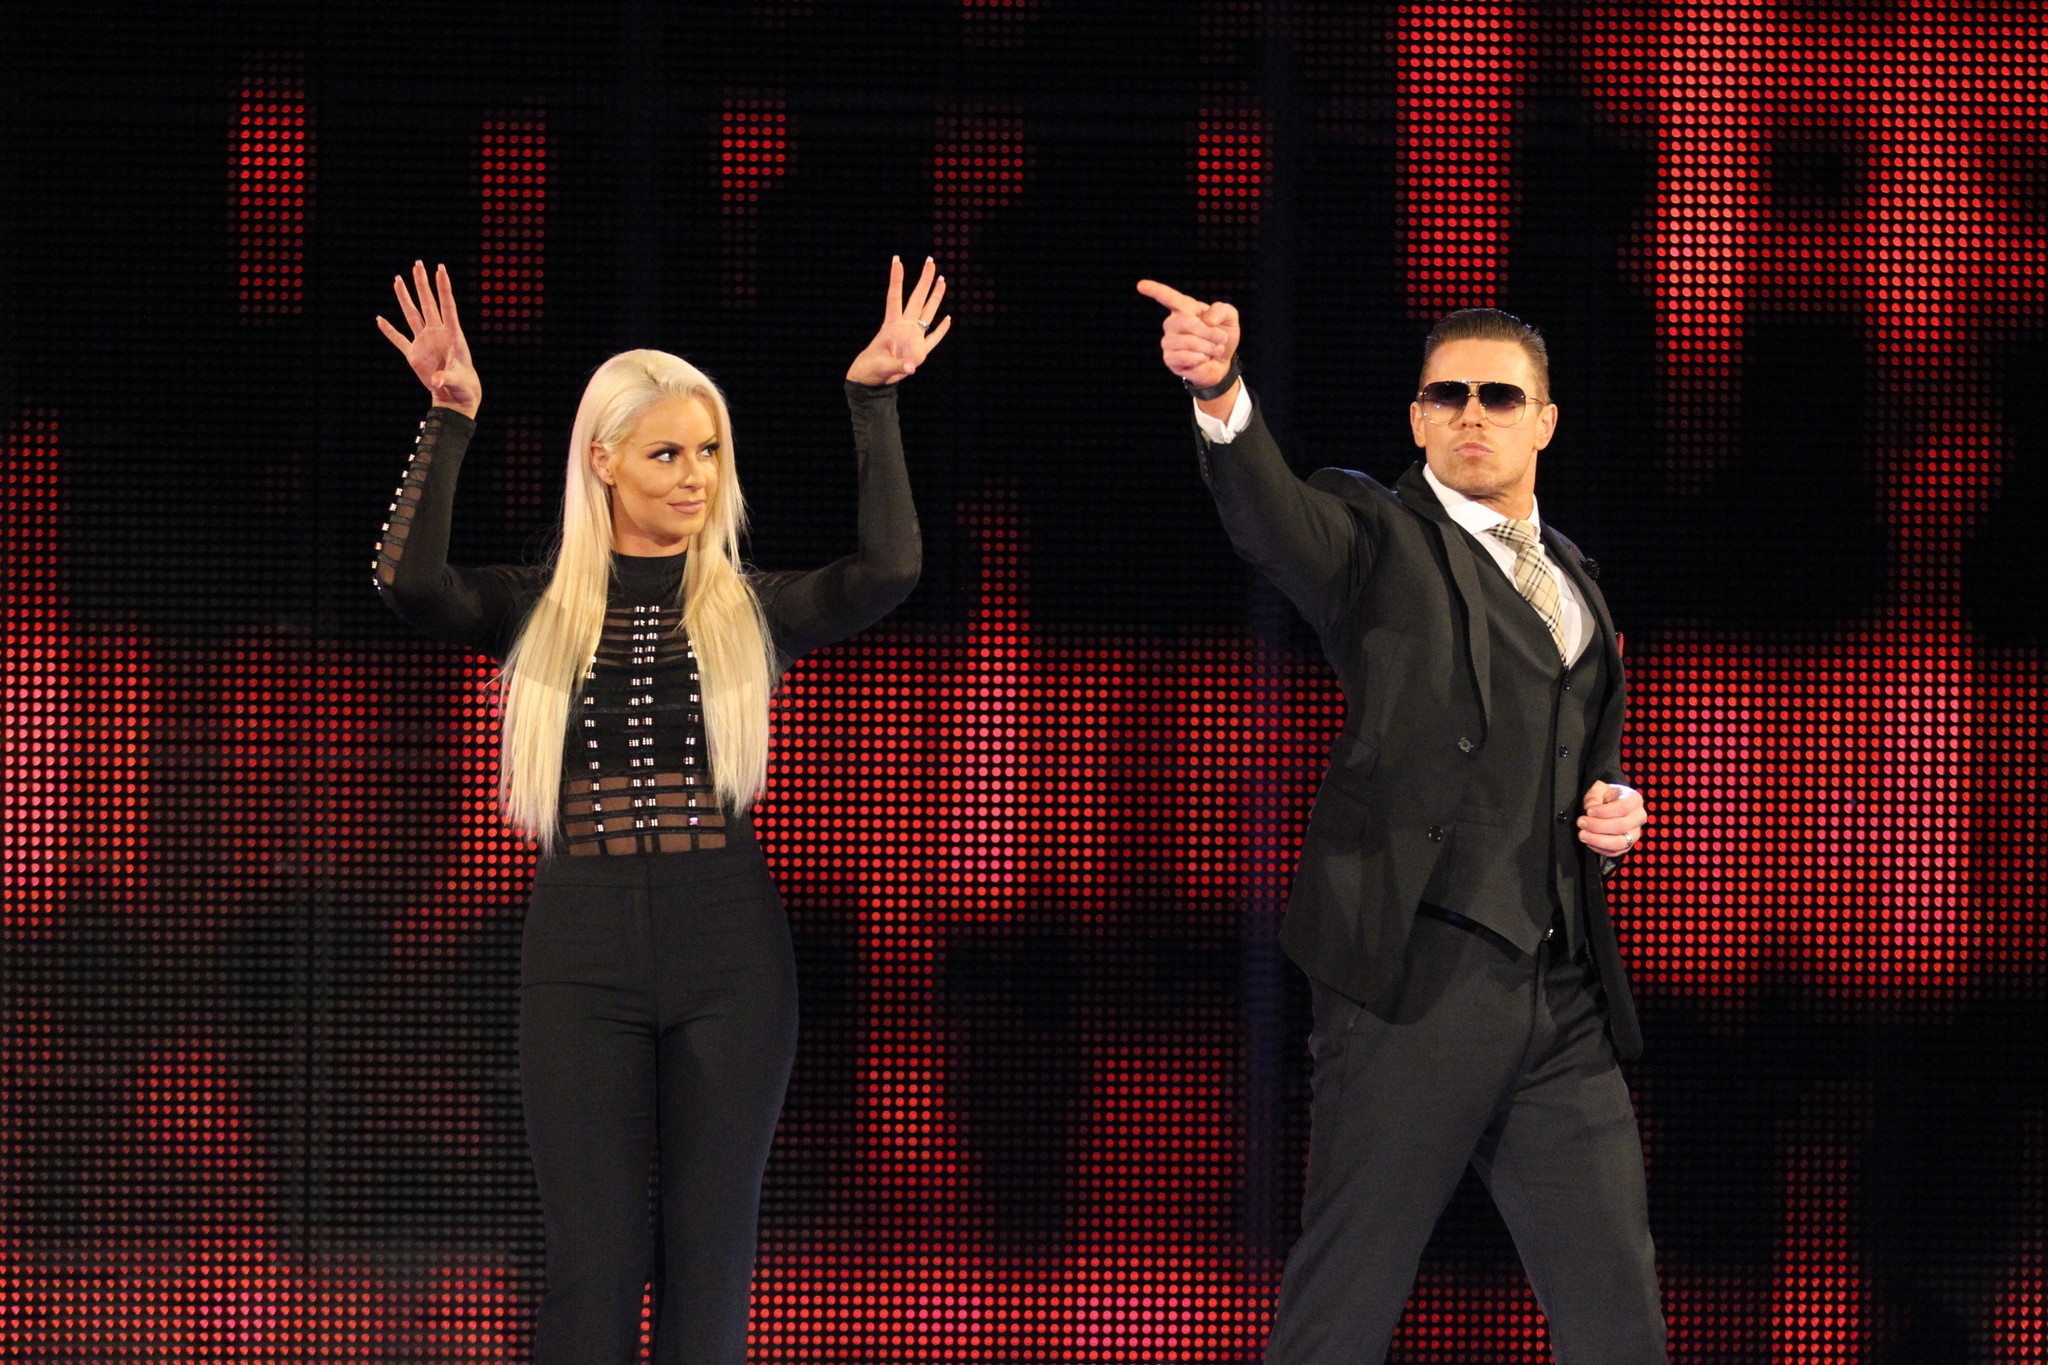 WWE's Maryse excited for tag-team match with husband The Miz - Orlando Sentinel2048 x 1365